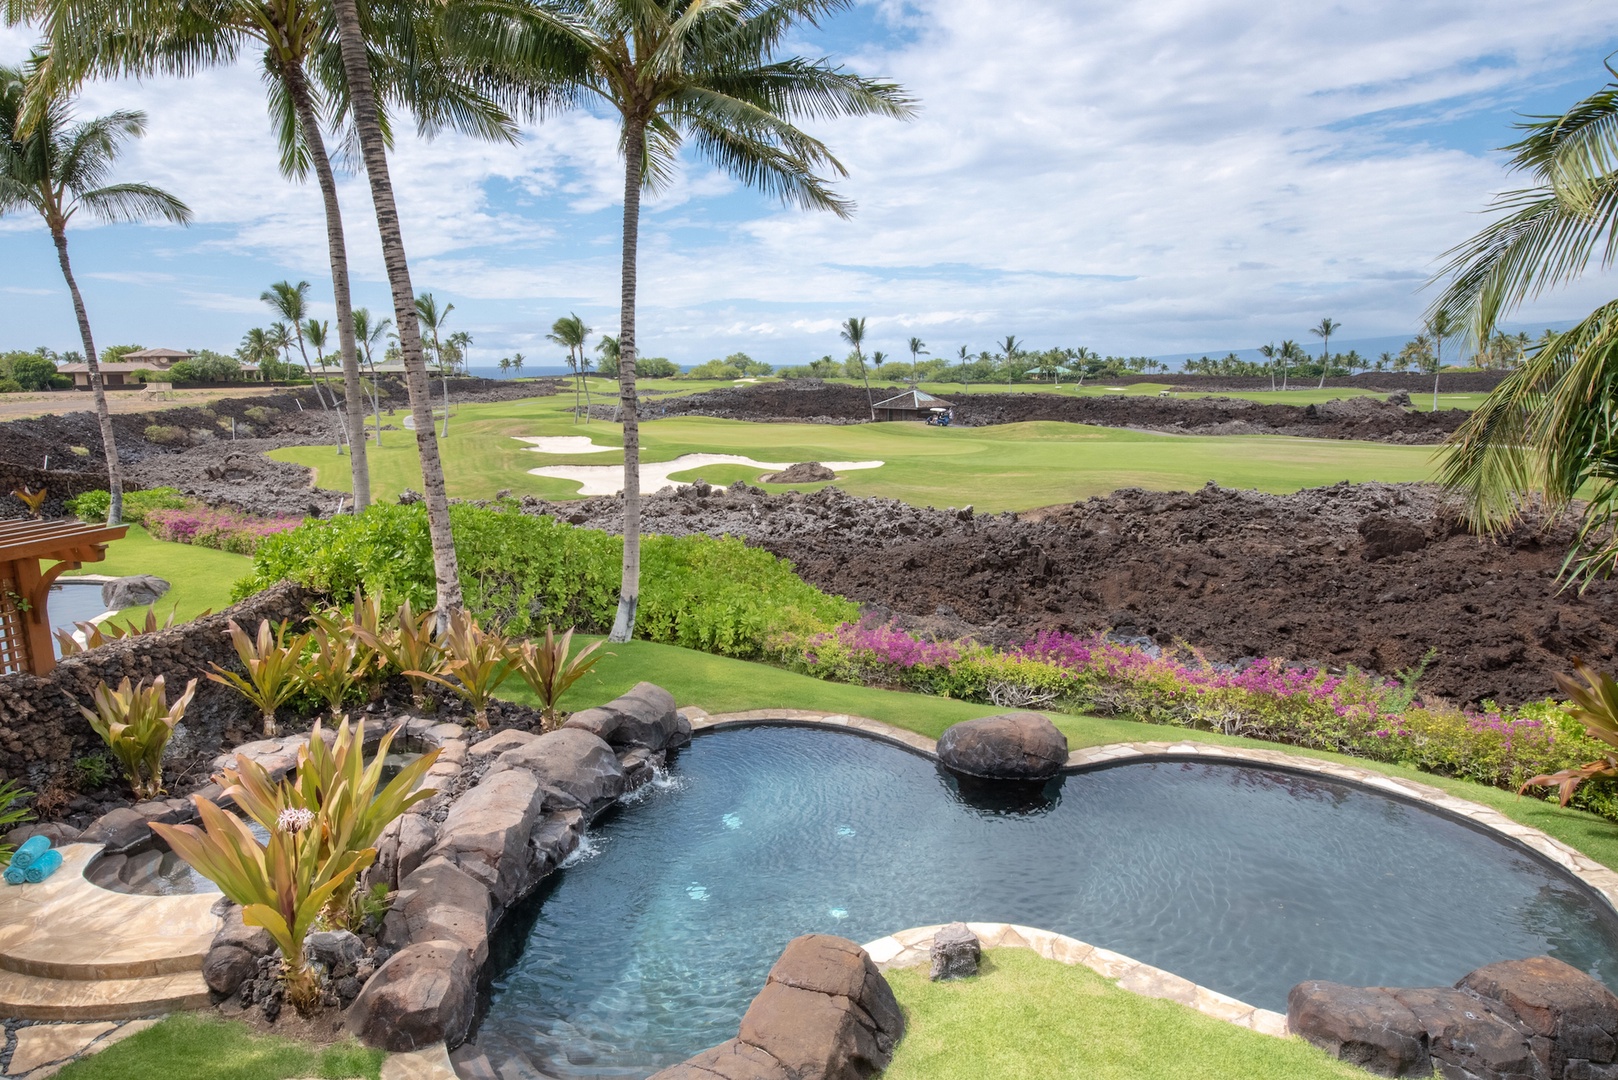 Kamuela Vacation Rentals, 3BD OneOcean (1C) at Mauna Lani Resort - View of the Pool and Golf Course from Upstairs Primary Lanai